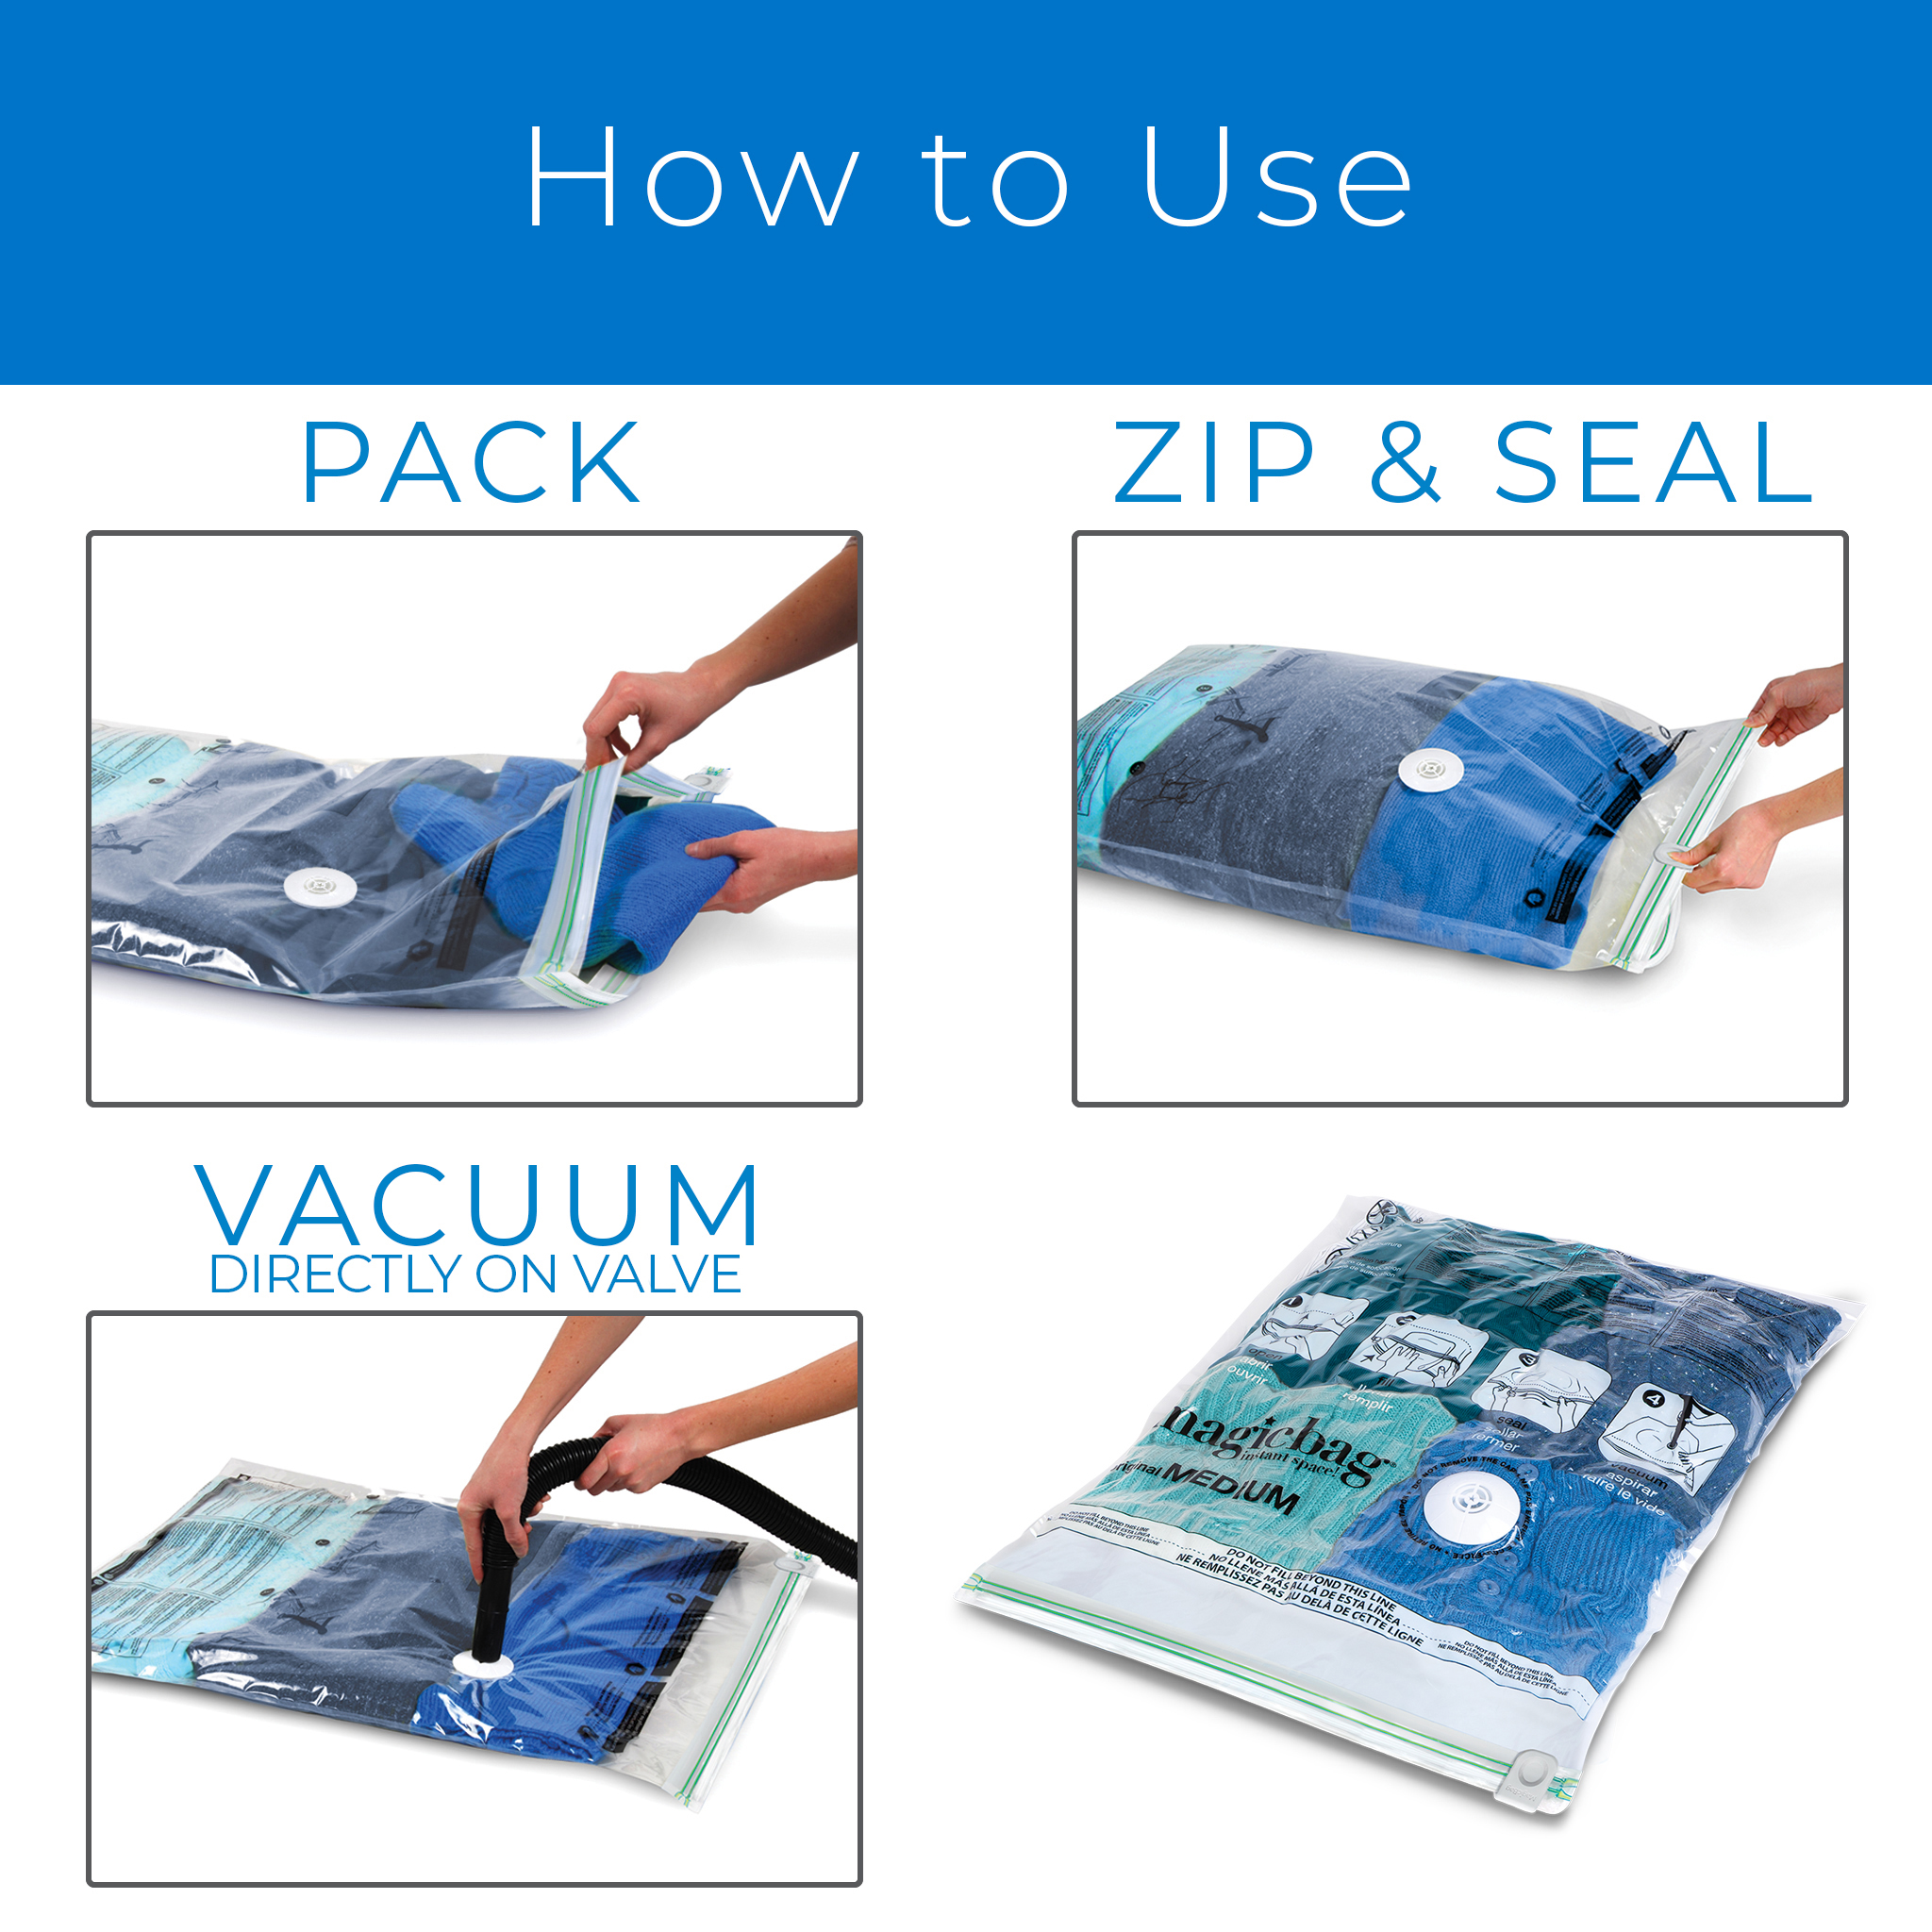 MagicBag® Original Flat Instant Space Saver Storage - Double Zipper - 4-Pack Combo - image 4 of 7